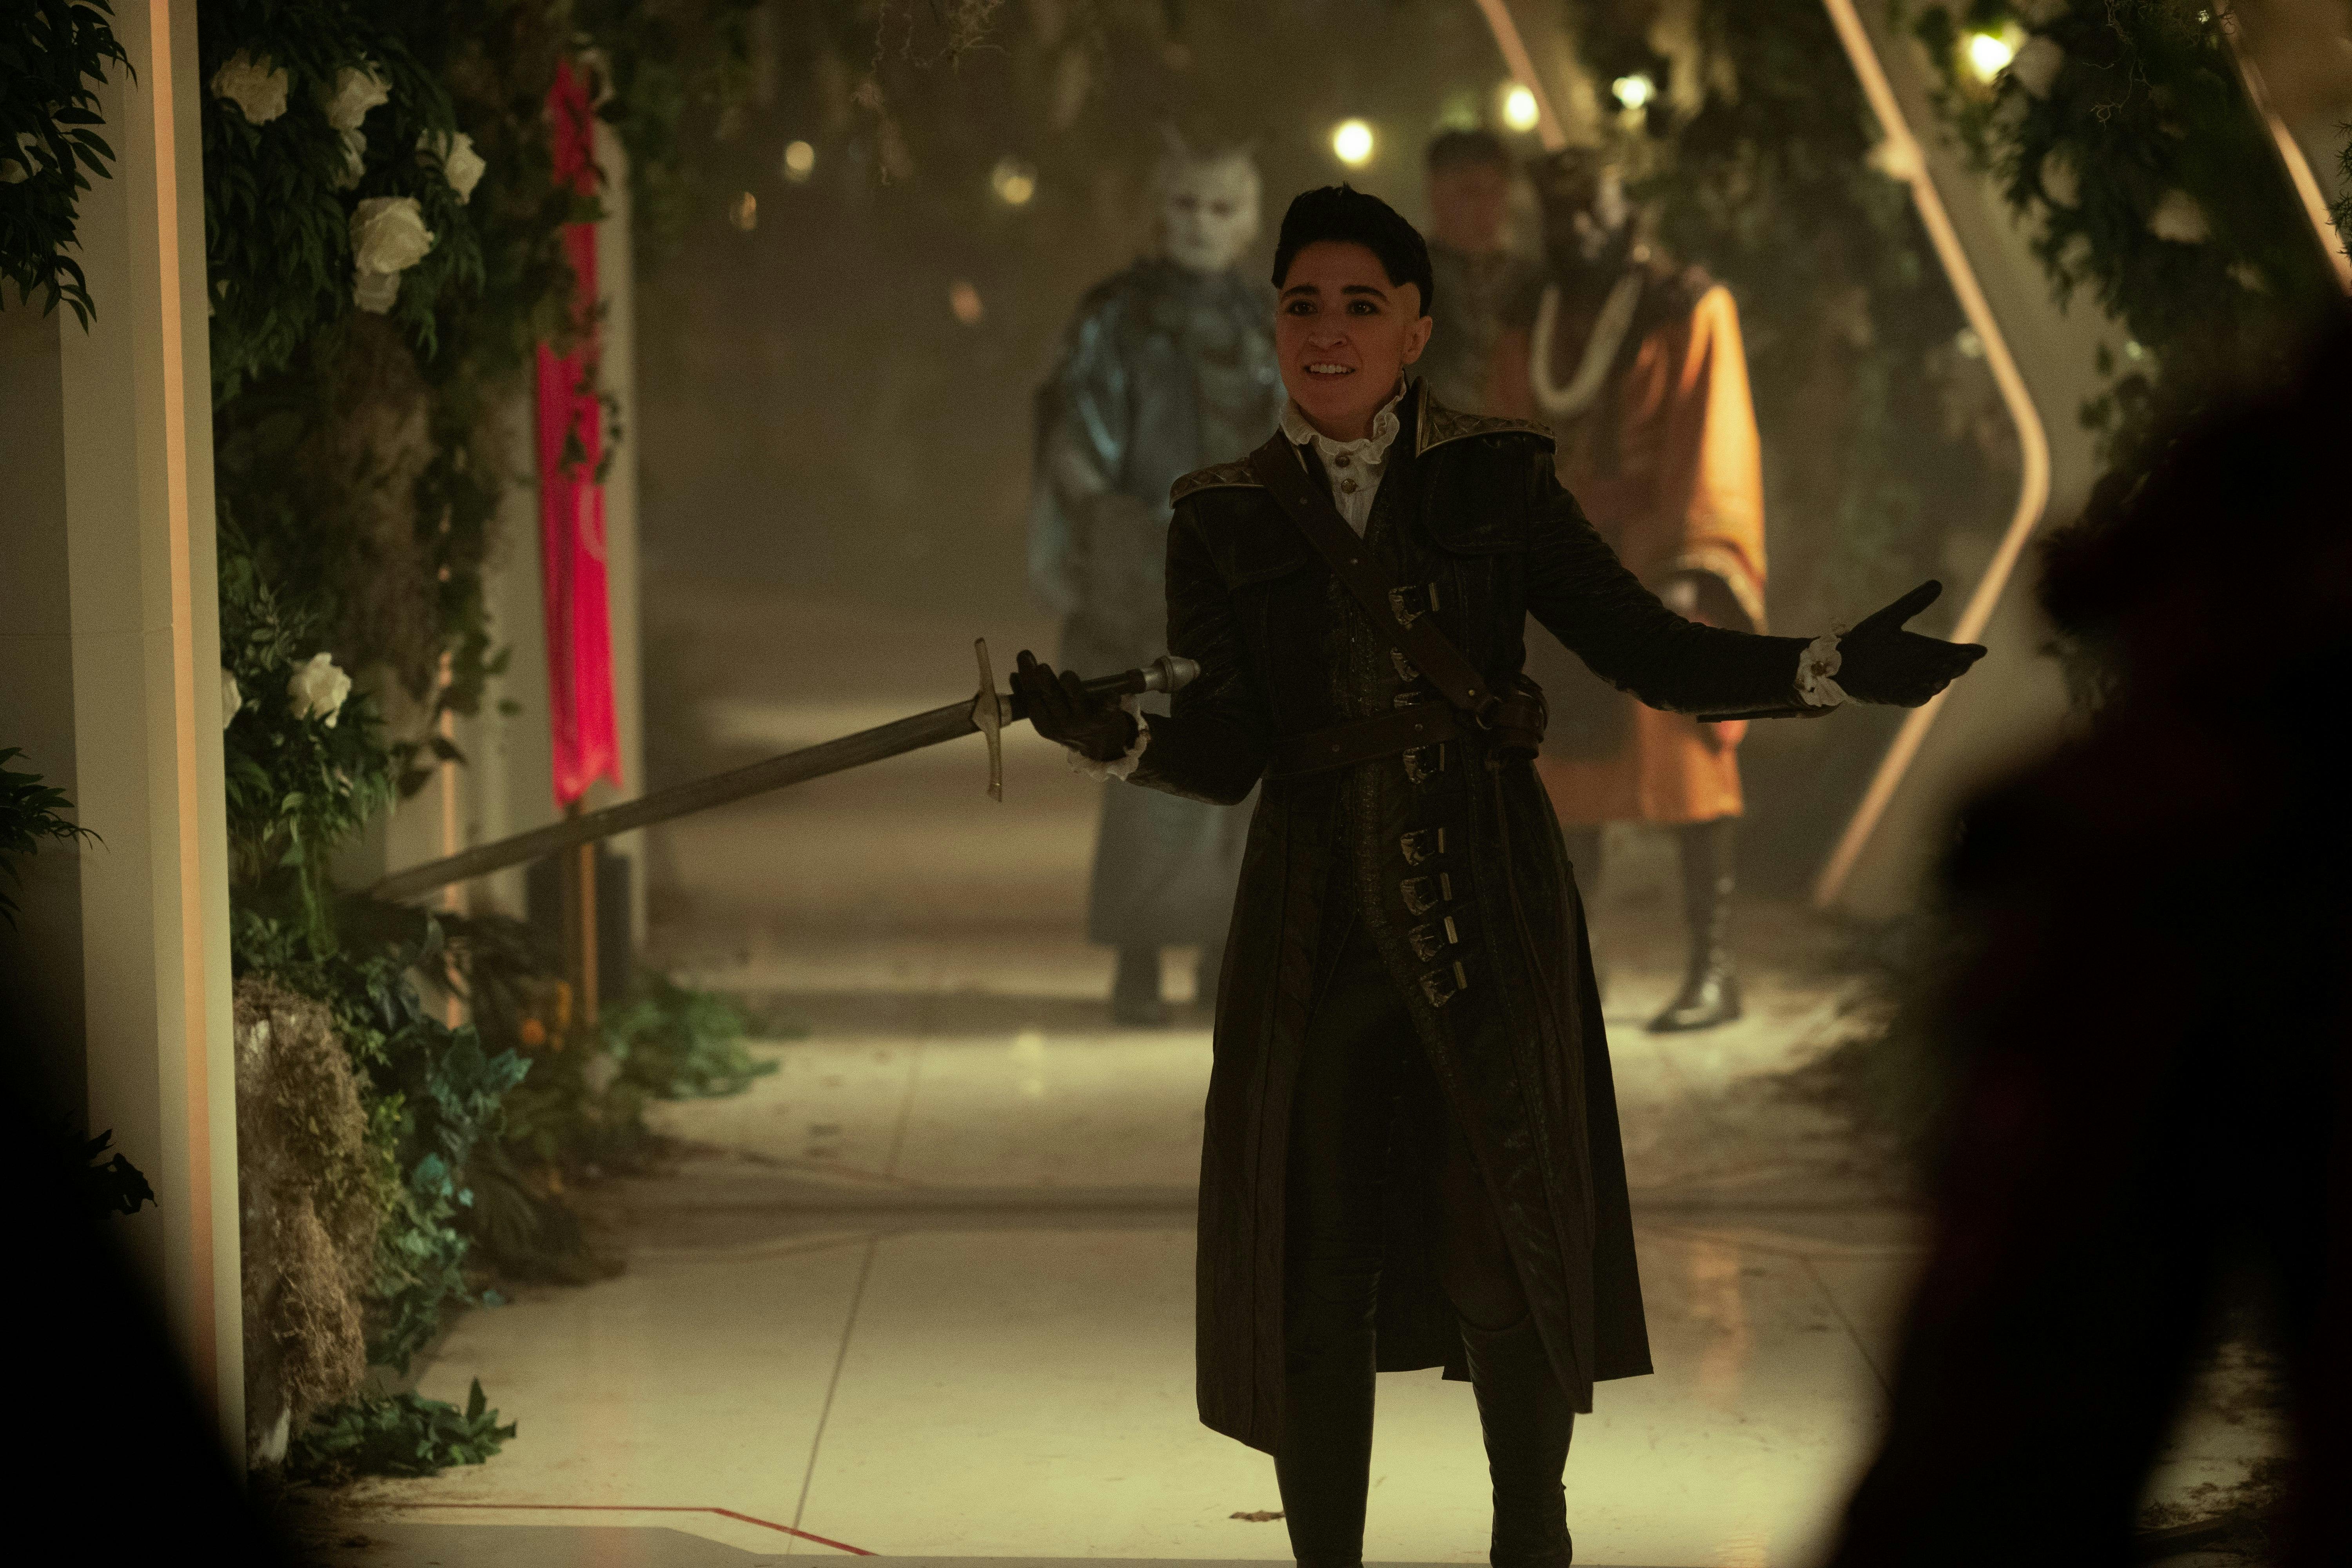 Ortegas (Melissa Navia), holding a sword and wearing medieval clothes, stands in the middle of the Enterprise's hallway. The hallway is overgrown with leaves. There is a small group standing behind her.